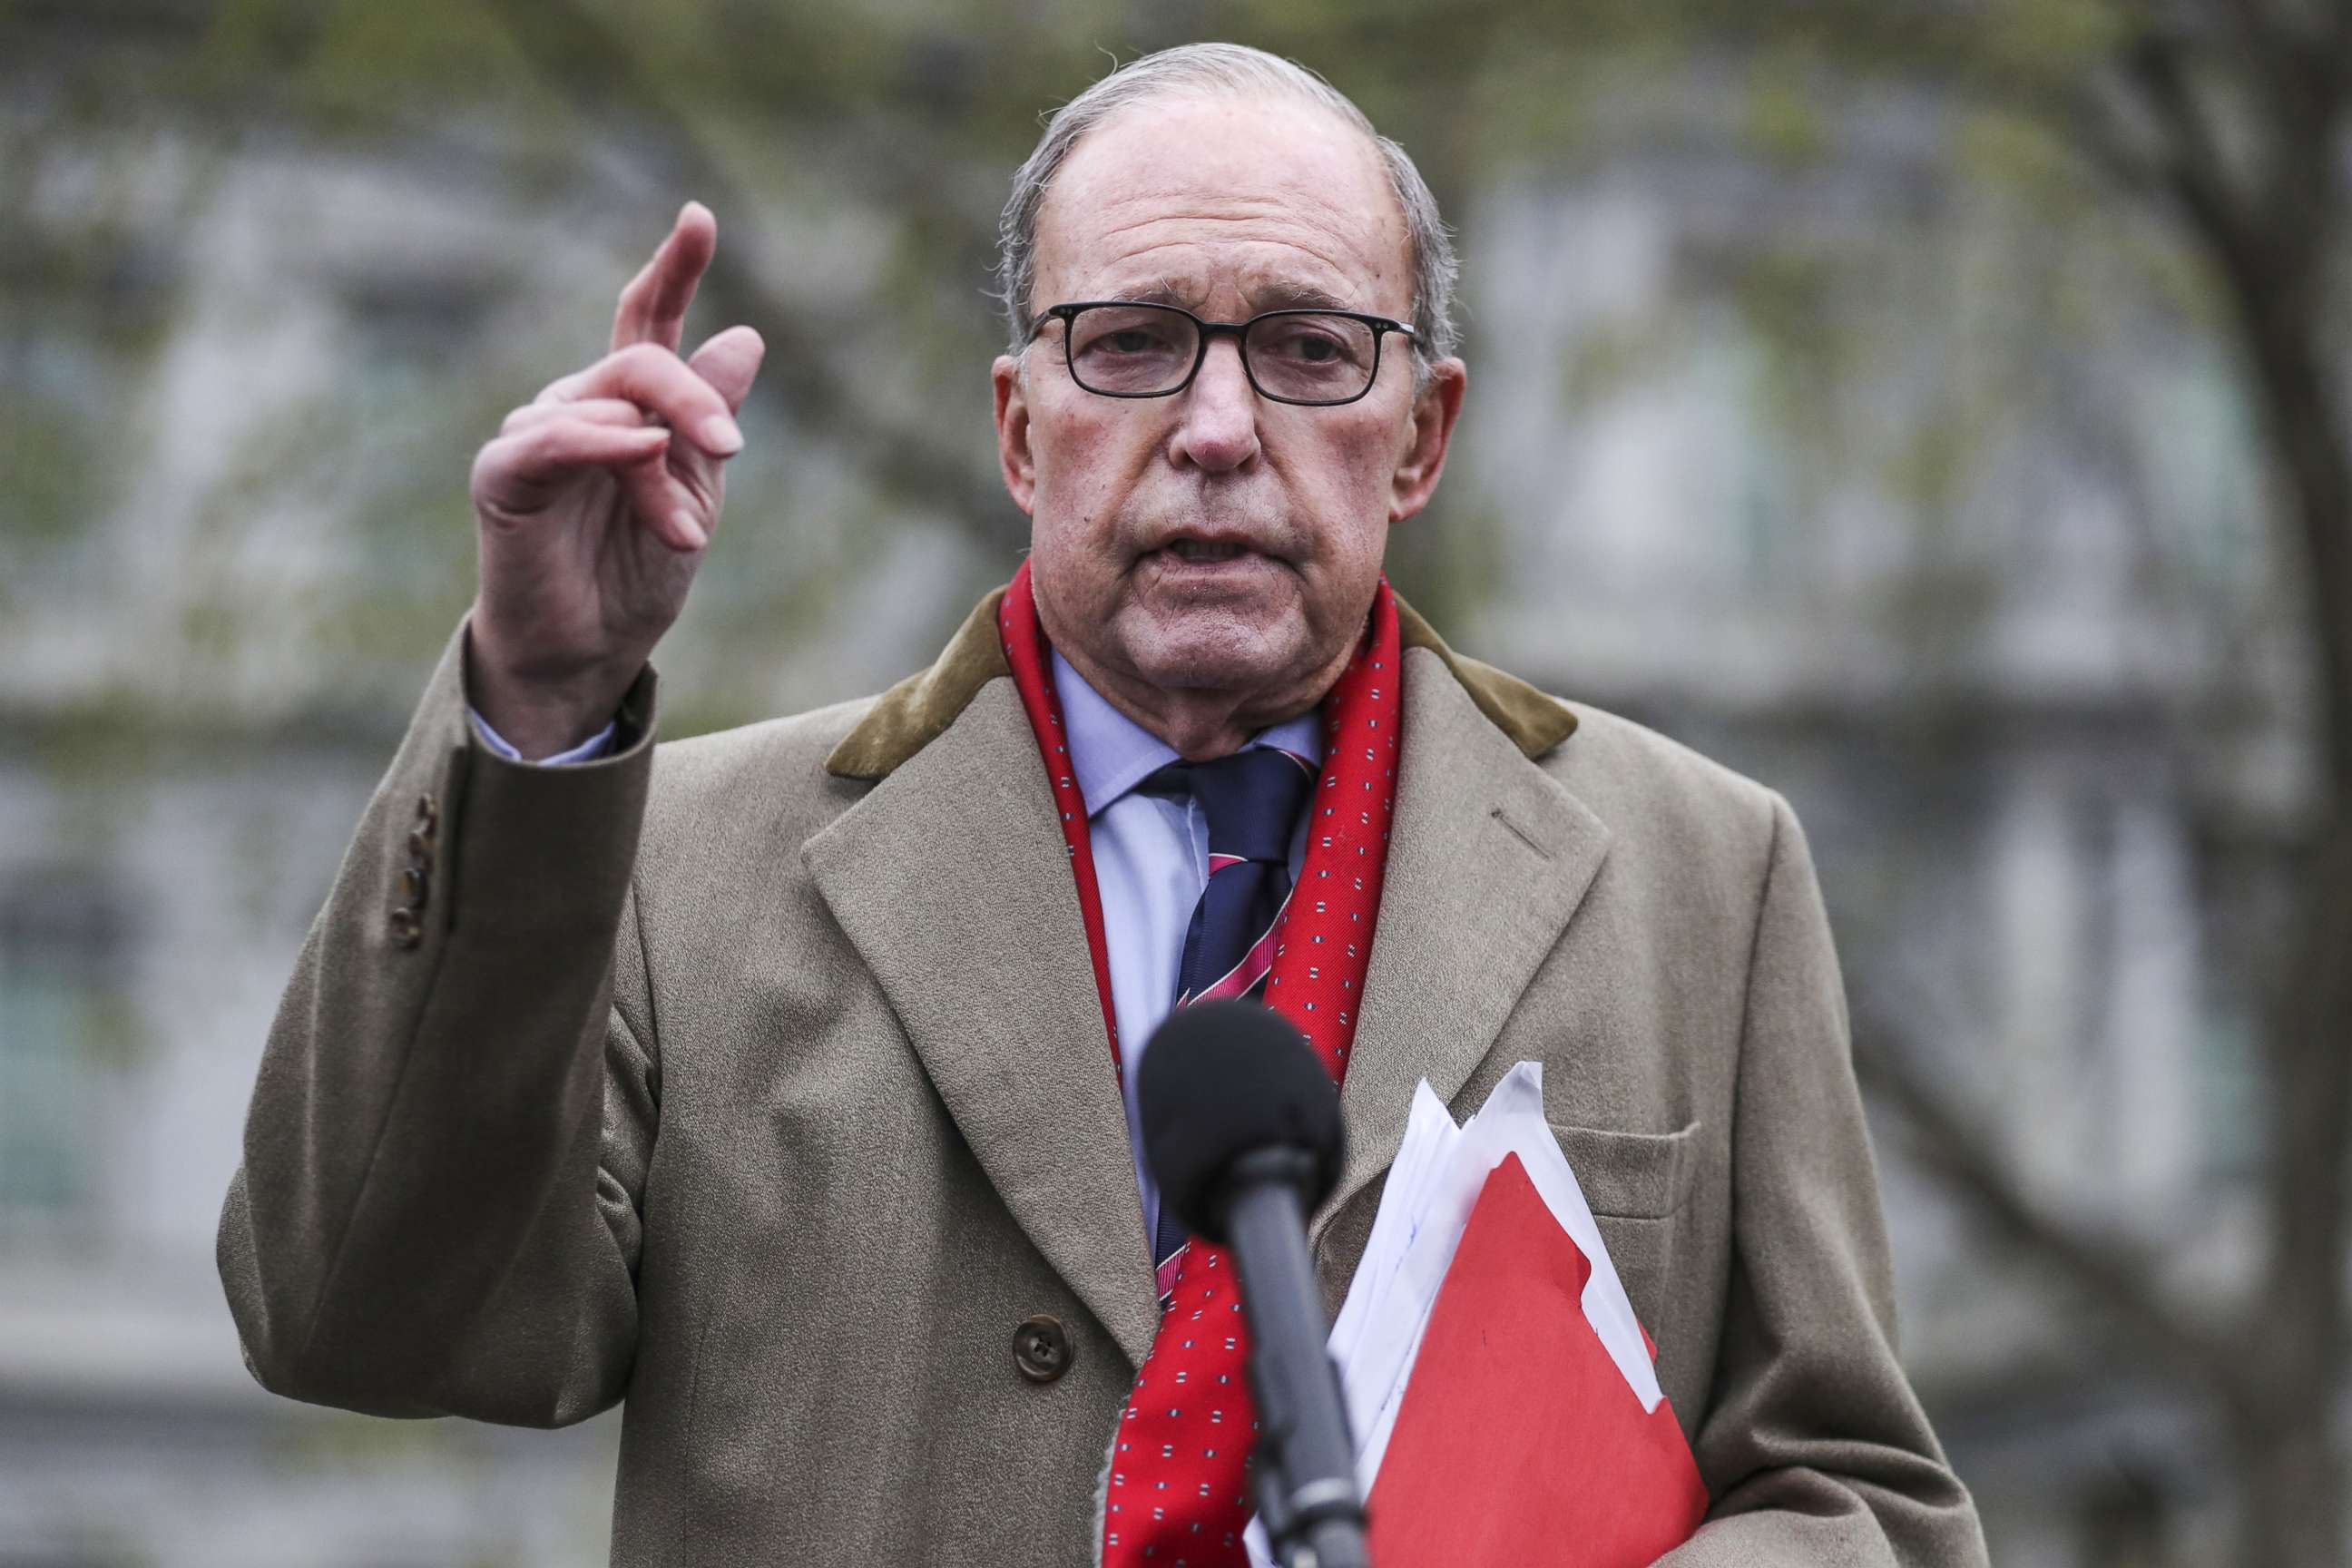 PHOTO: Larry Kudlow, director of the U.S. National Economic Council, speaks to members of the media at the White House in Washington, D.C., U.S., on Monday, March 24, 2020.